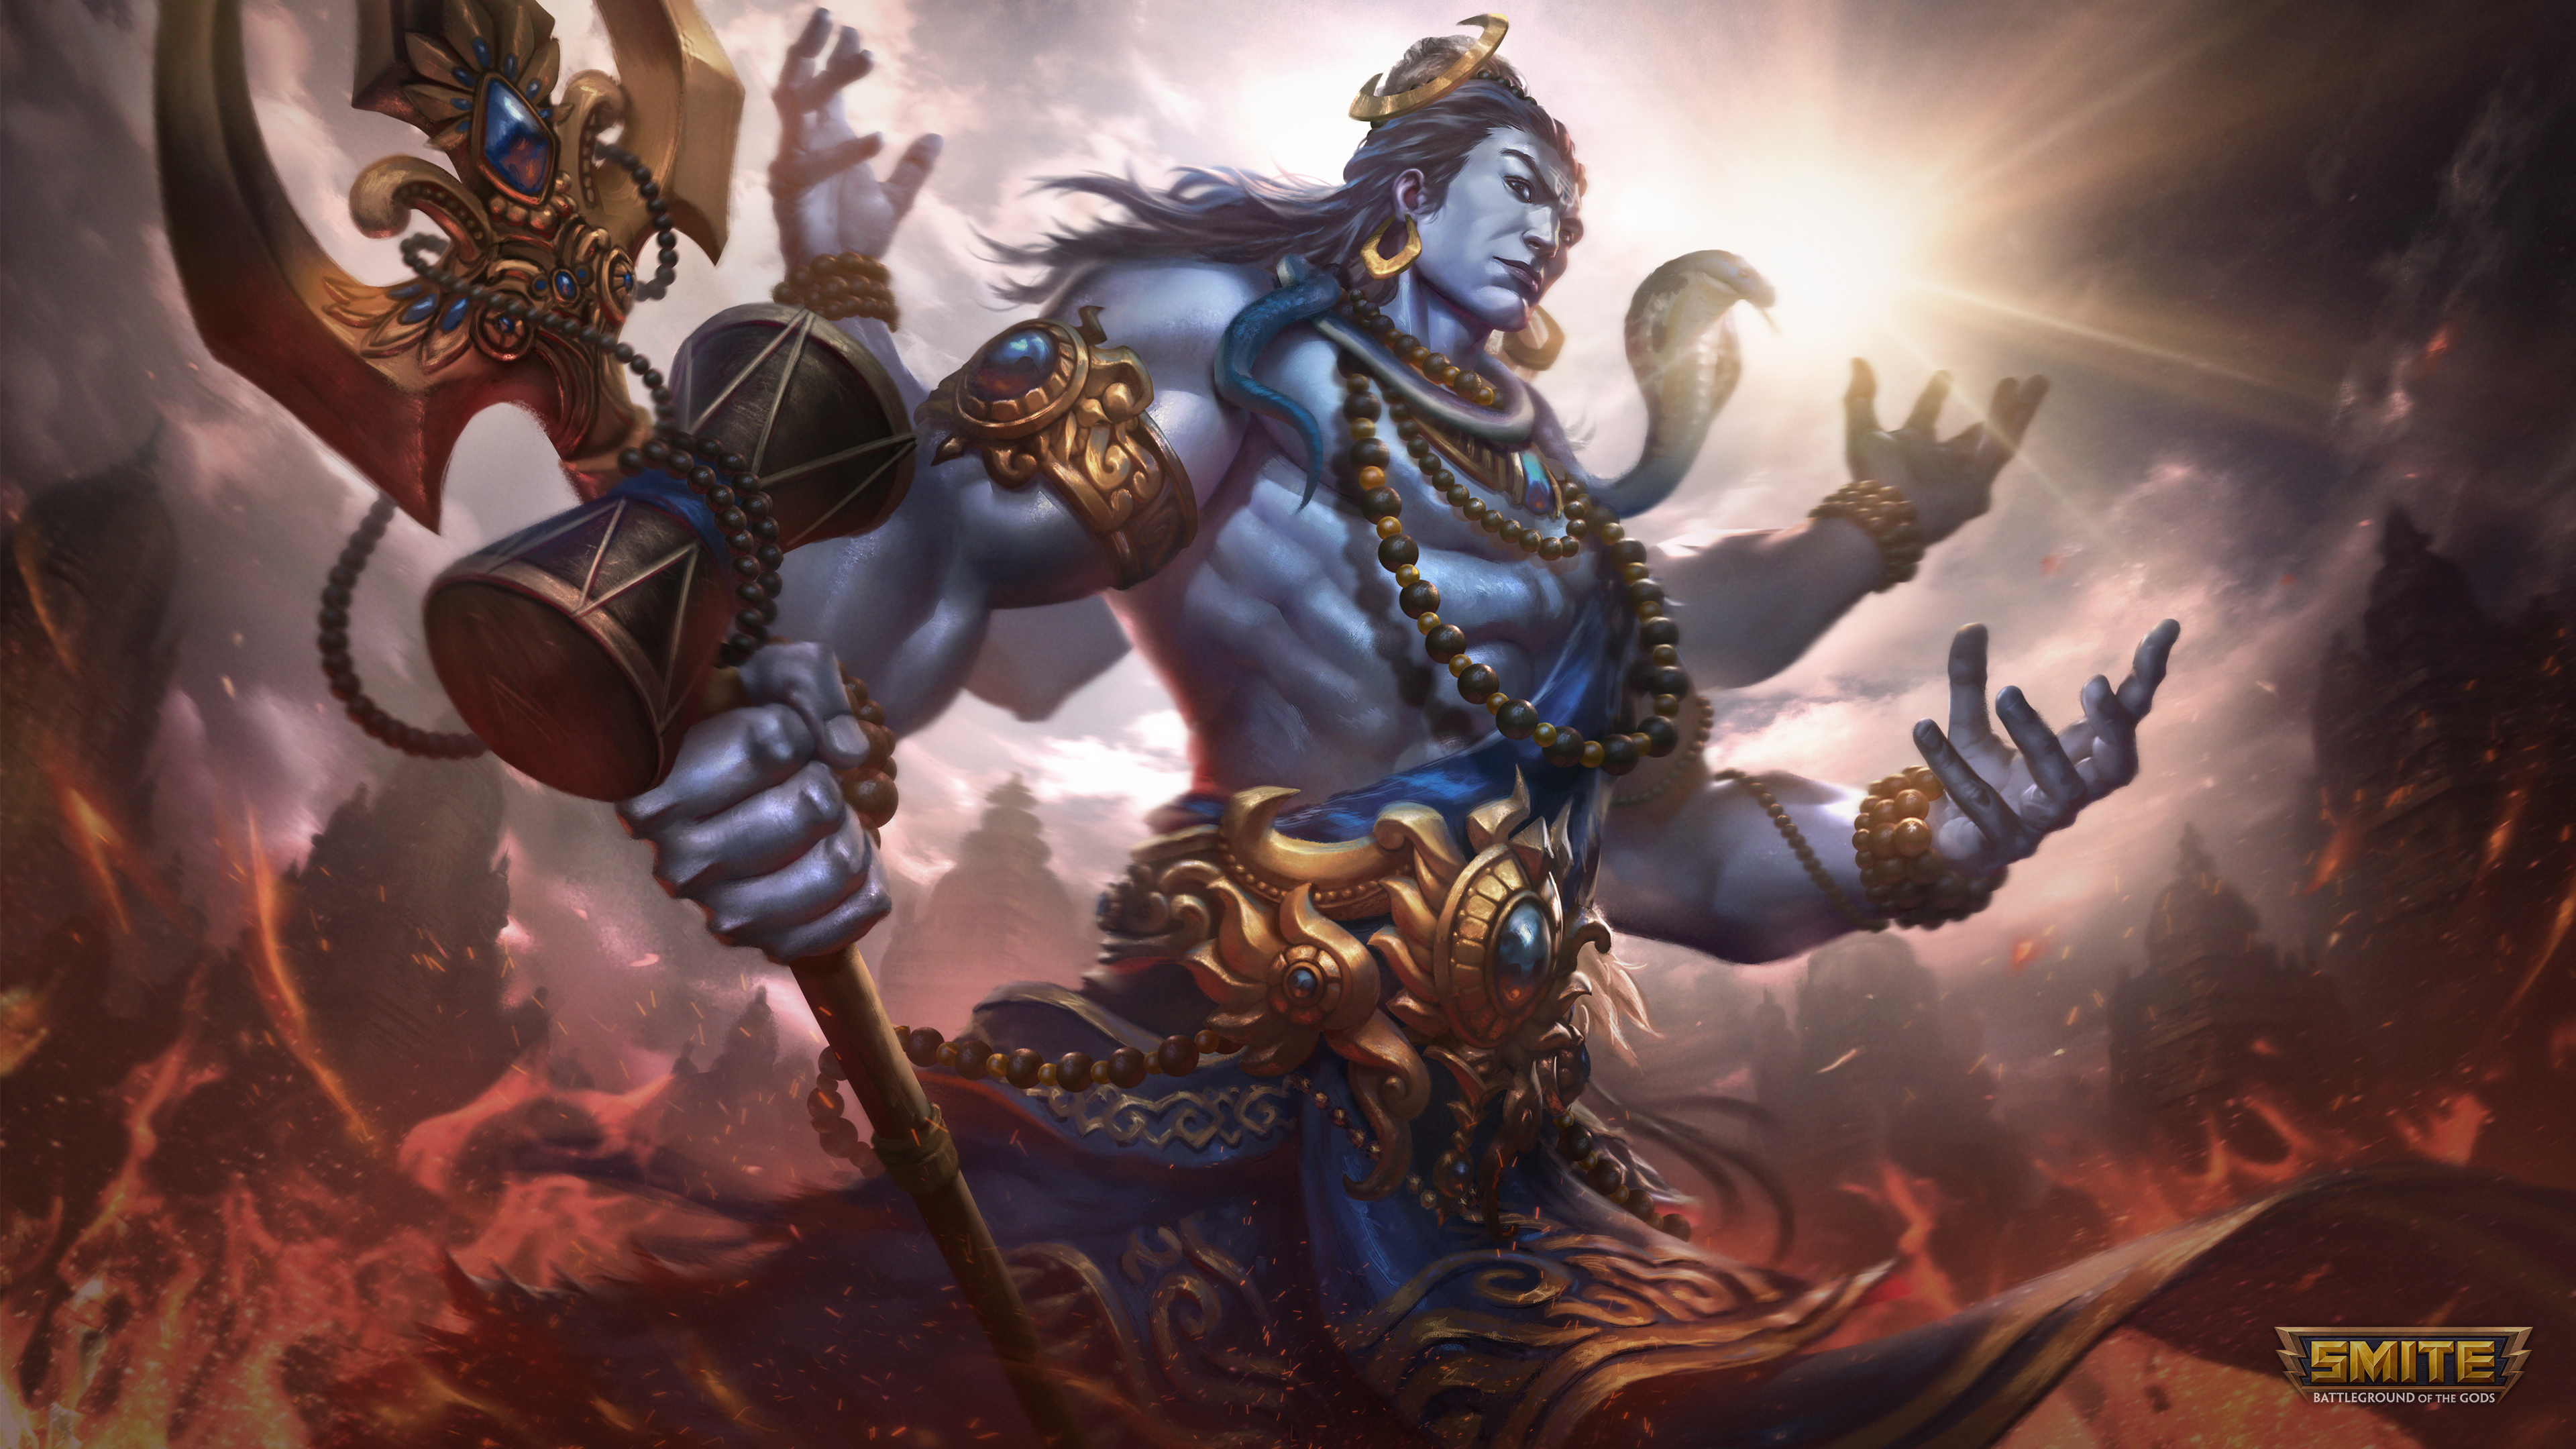 Lord Shiva Wallpaper 4K, The Destroyer, Smite, Games, #7305